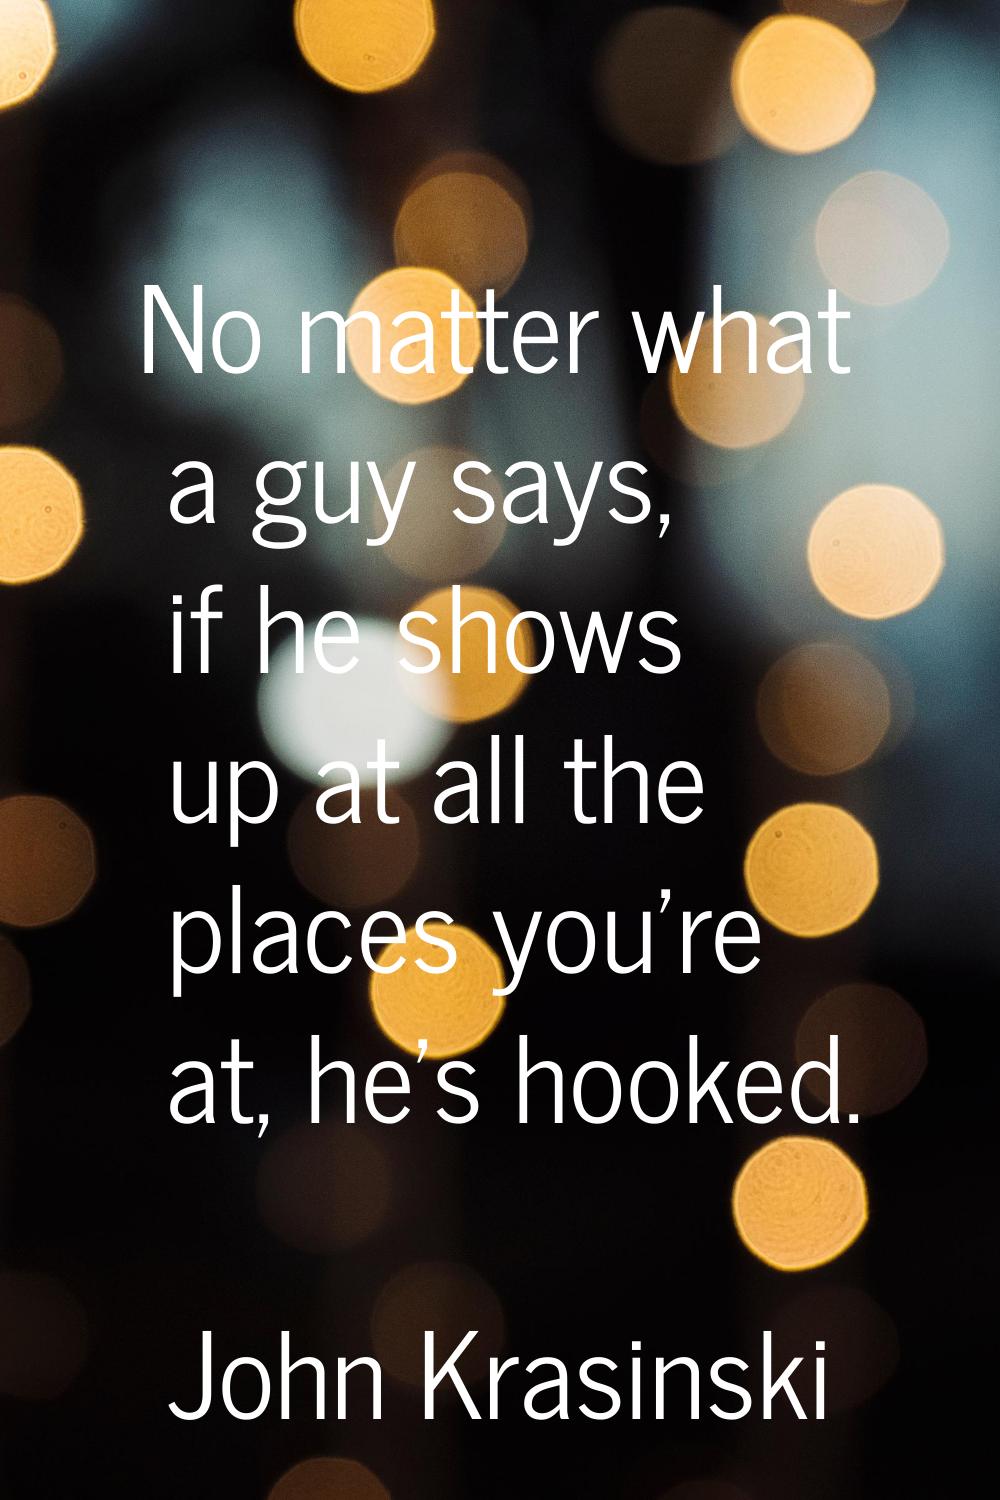 No matter what a guy says, if he shows up at all the places you're at, he's hooked.